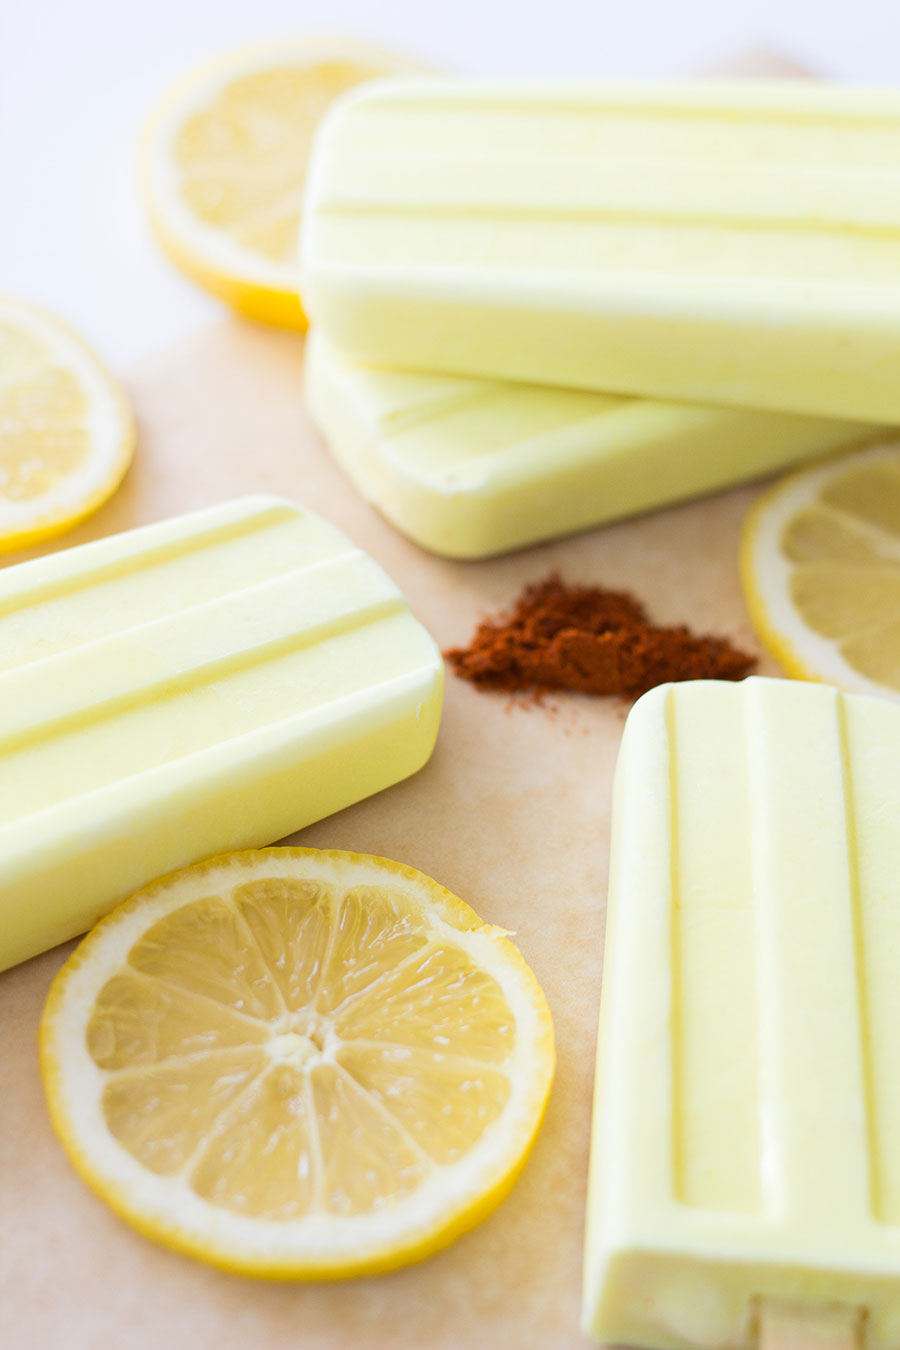 Lemon, Ginger, and Cayenne Wellness Pops | Pretty Prudent